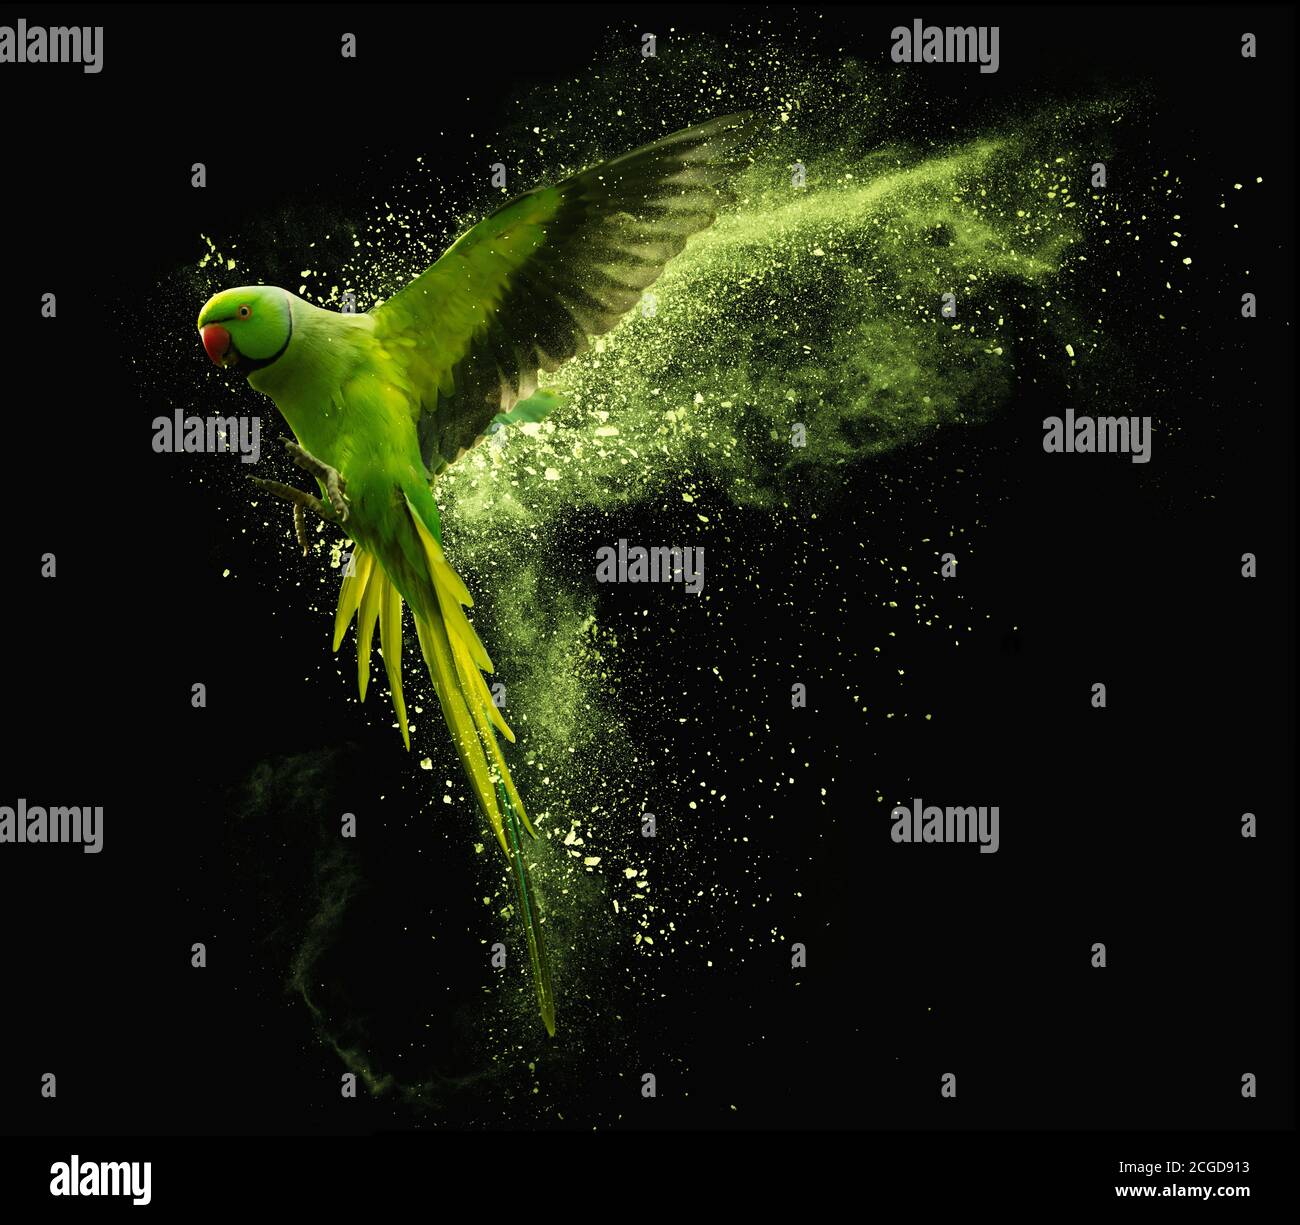 Flying green parrot Alexandrine parakeet with colored powder clouds.  Isolated on black background Stock Photo - Alamy